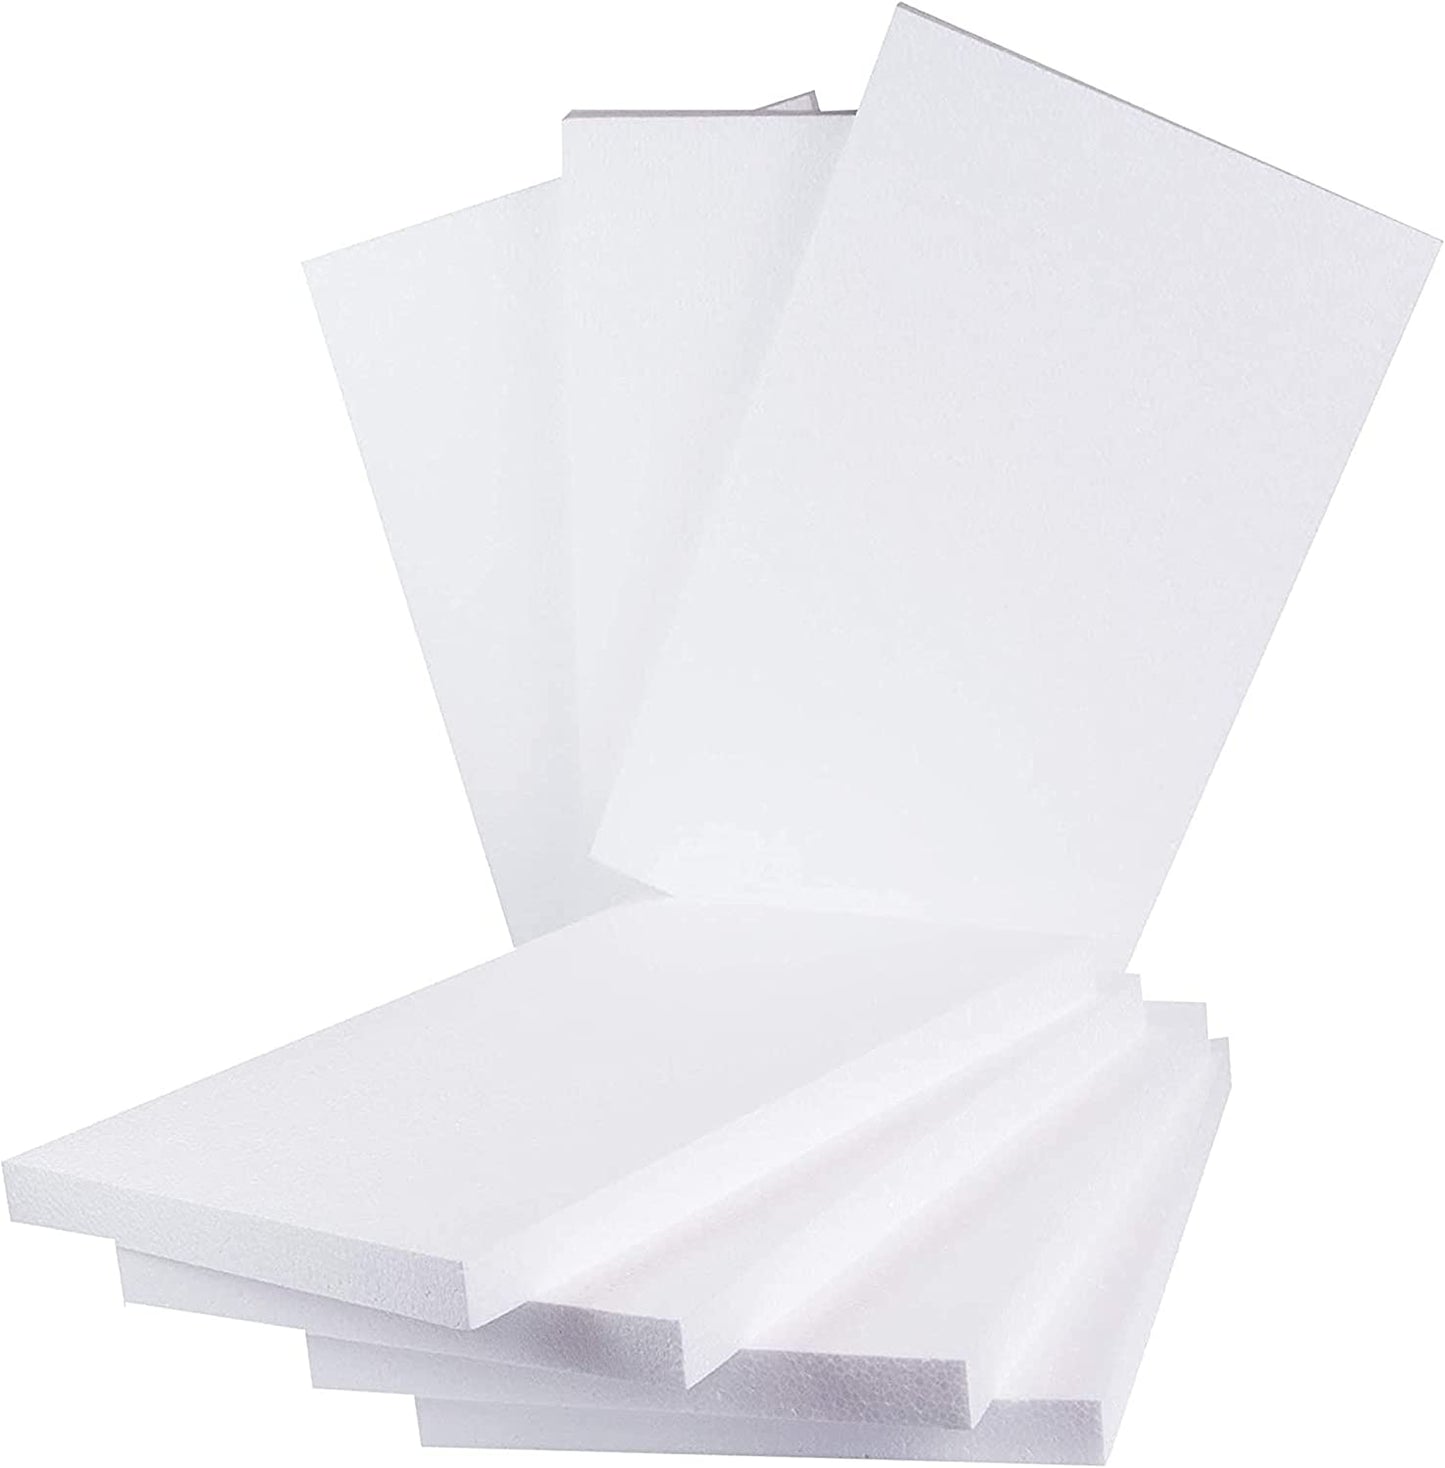 Polystyrene Expanded White Rigid Insulation Foam Packing Sheets 600mm x 400mm x 25mm